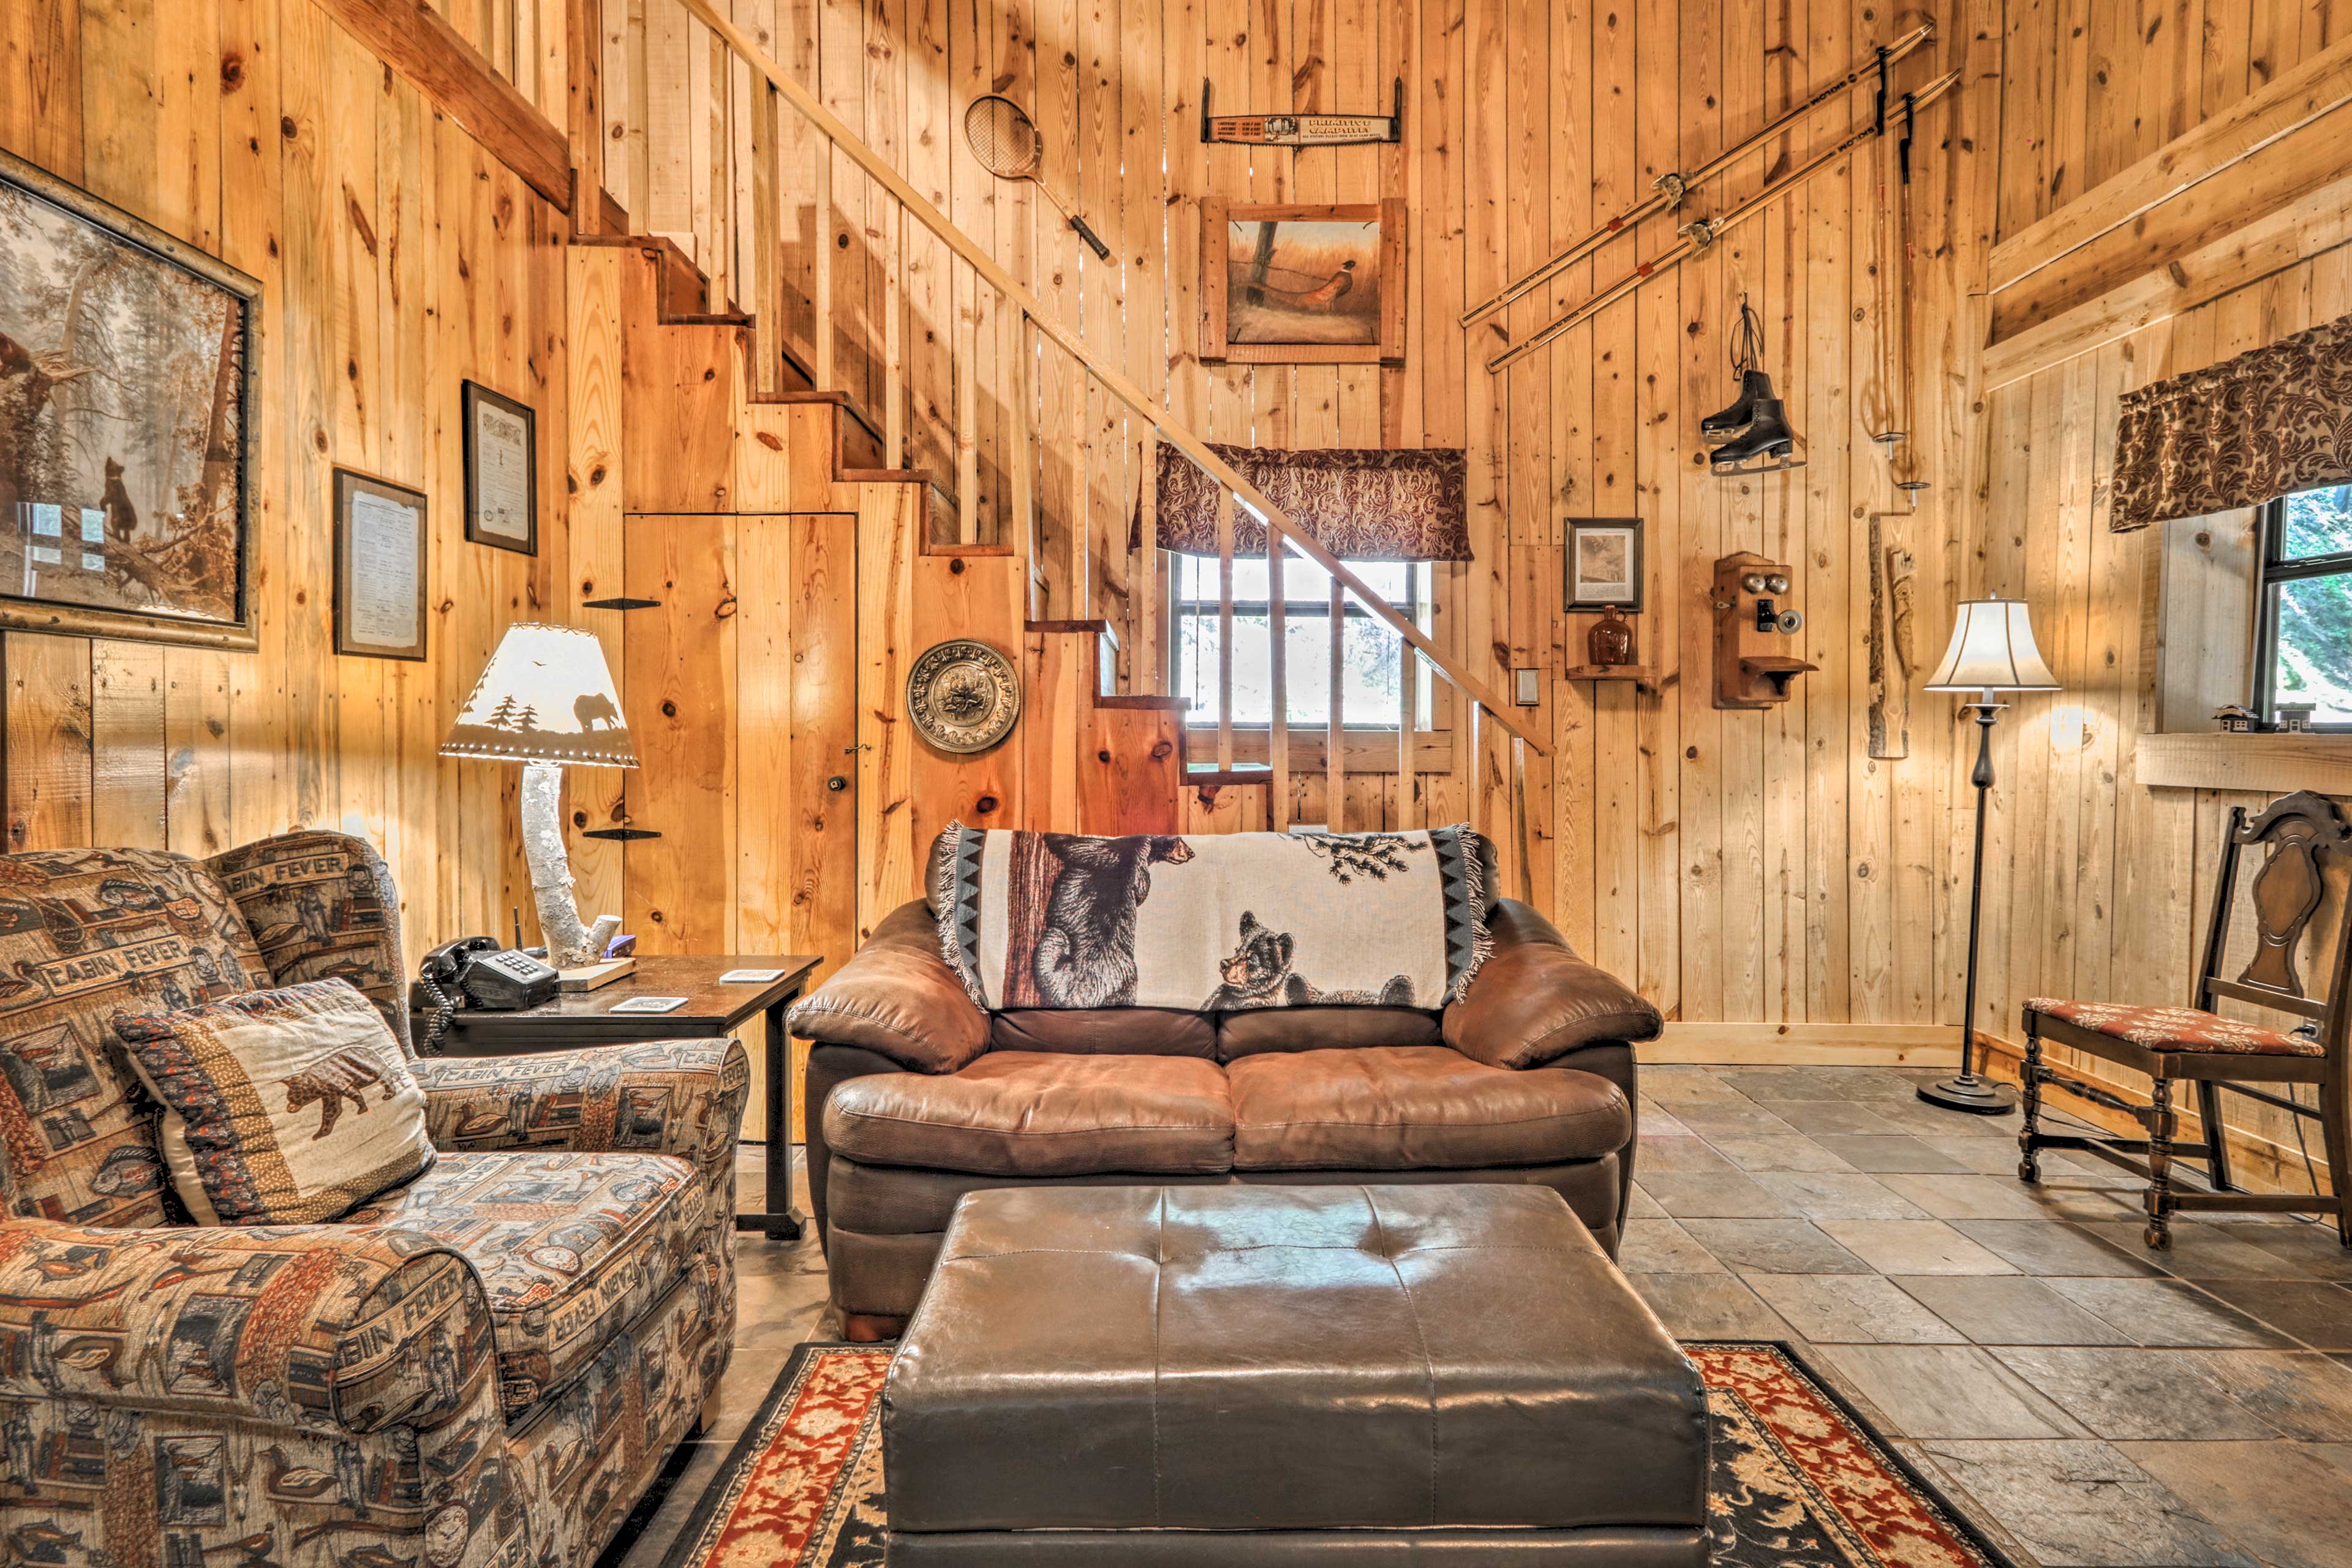 A rustic interior will add to the Smoky Mountain ambiance.